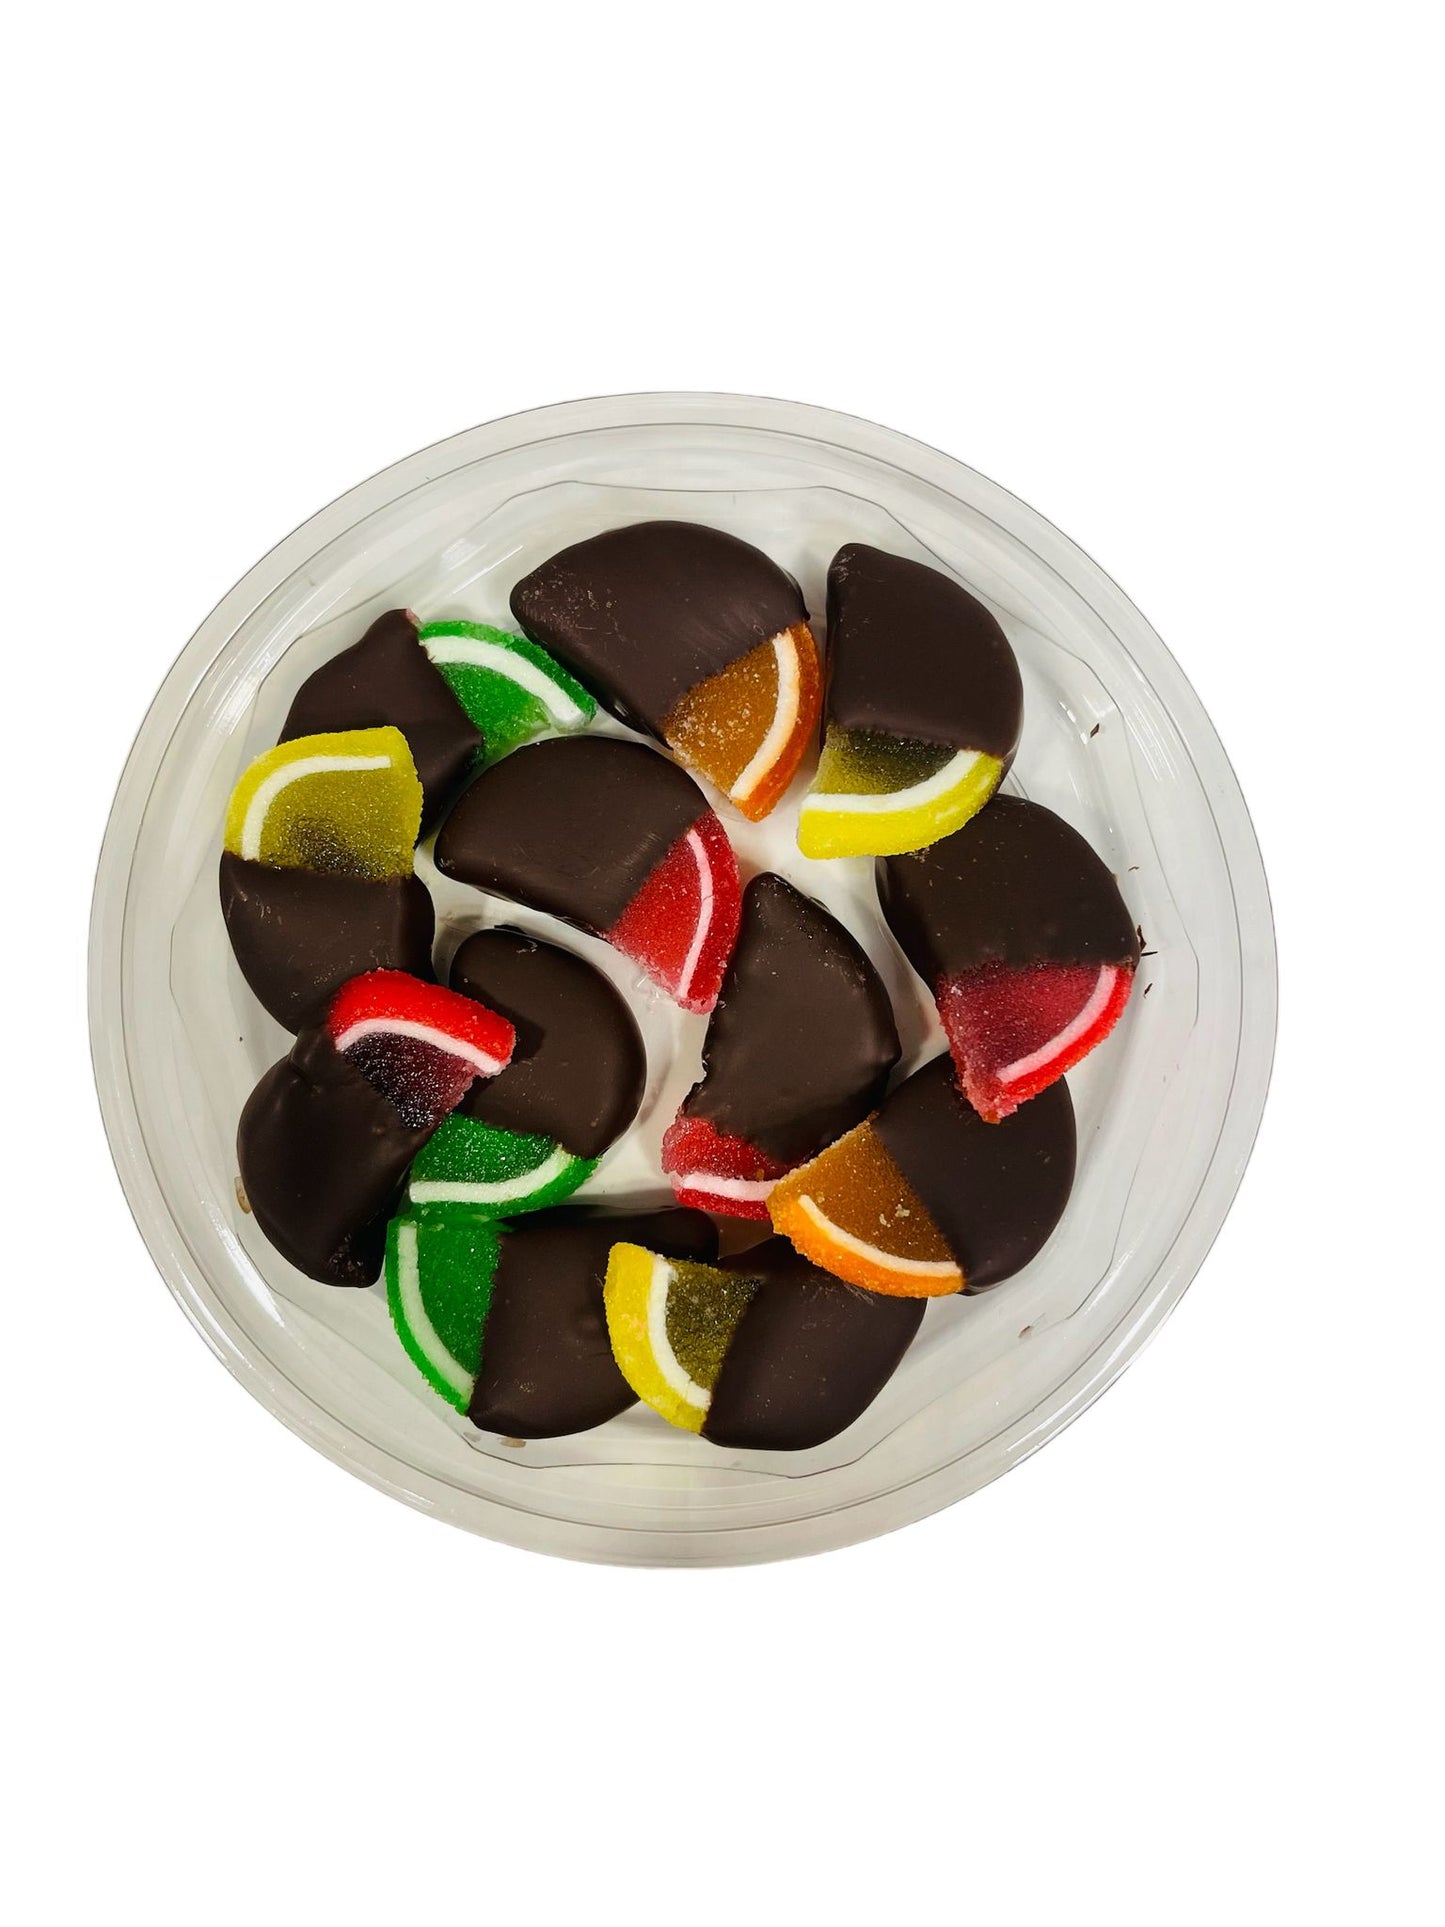 Chocolate Covered Fruit Flavored Slices | Kosher for Passover